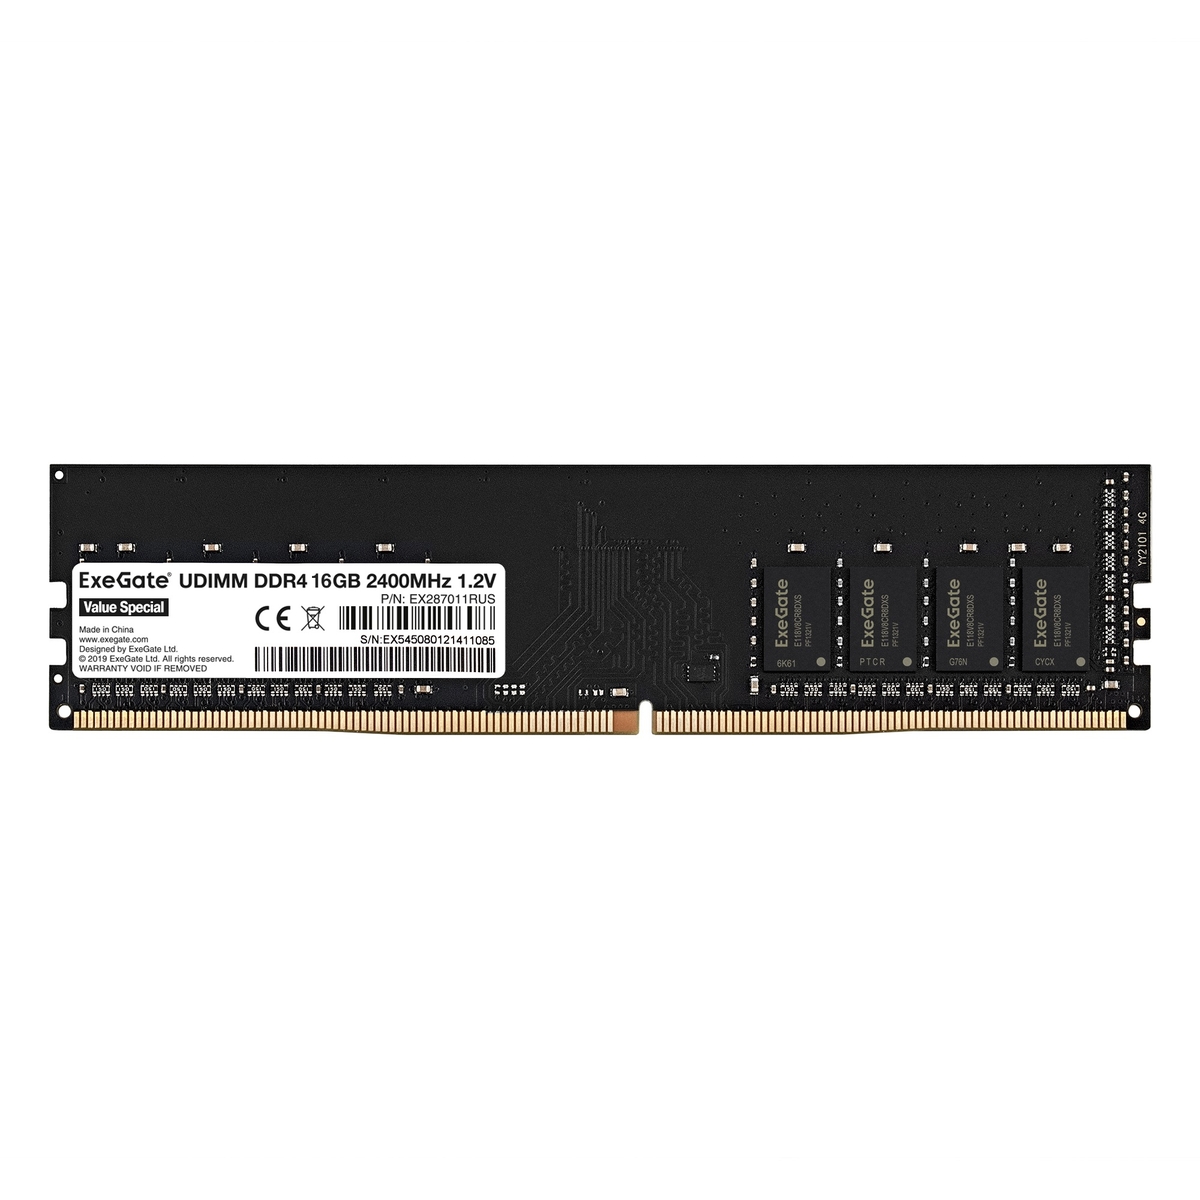 Value Special DIMM DDR4 16GB <PC4-19200> 2400MHz